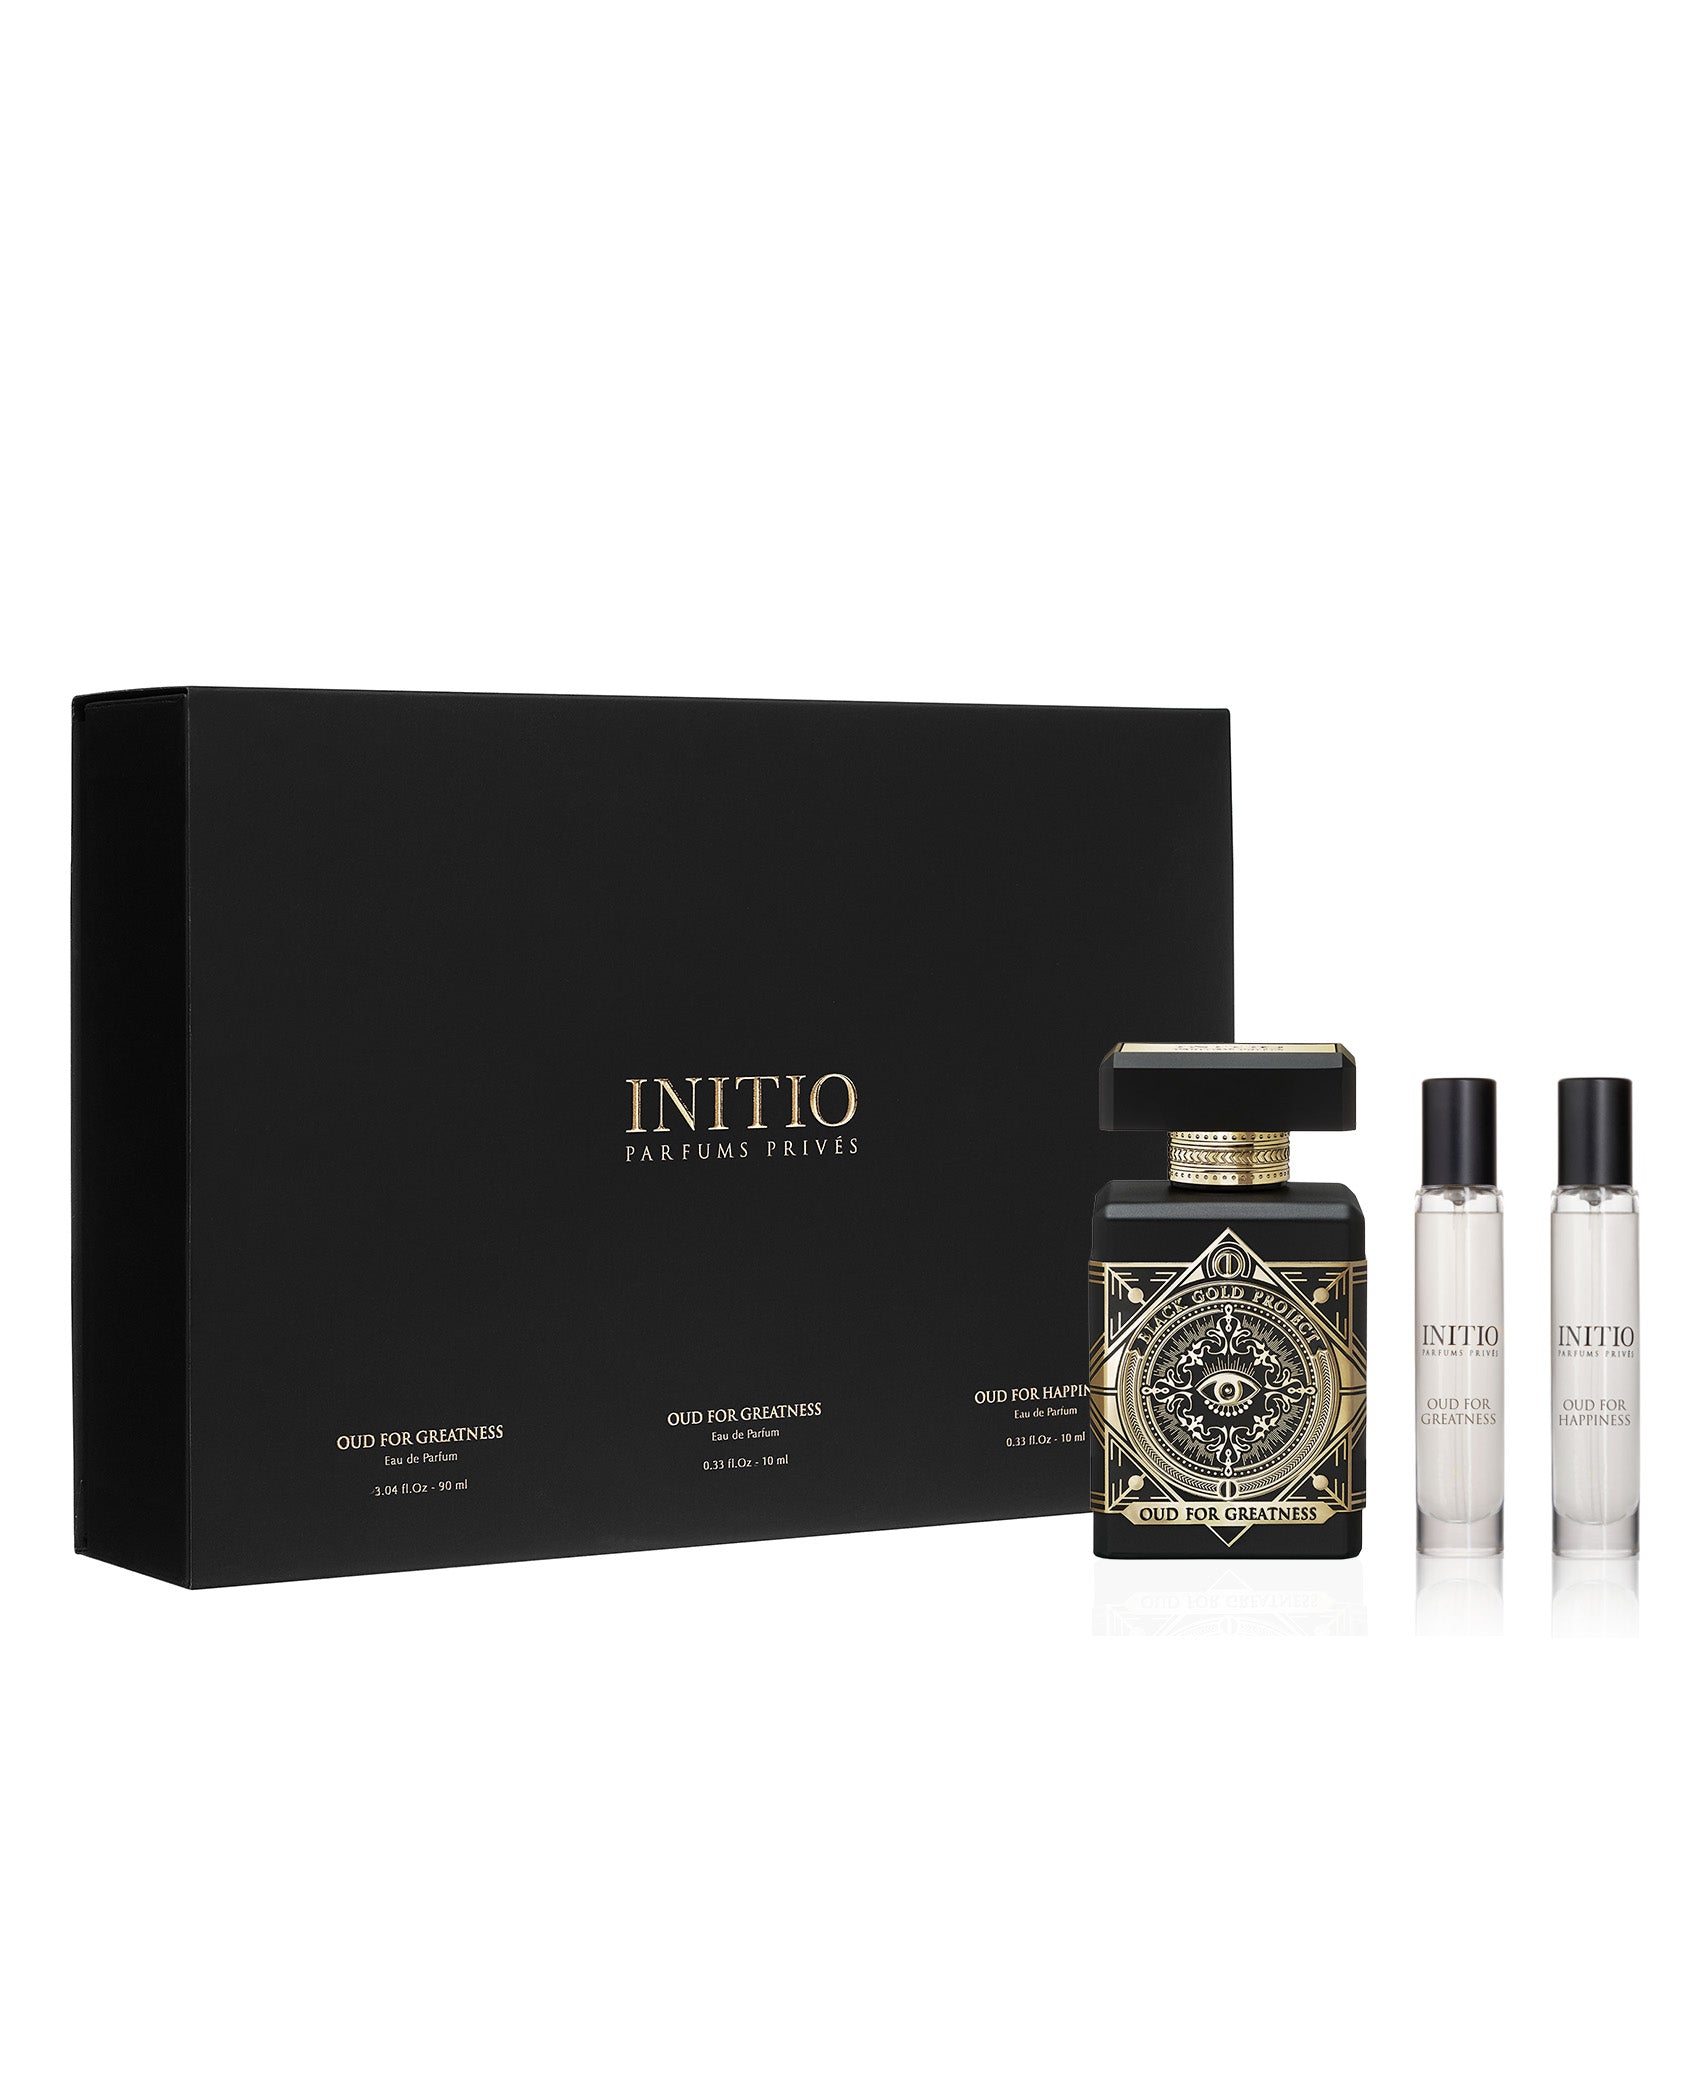 EDITION GREATNESS – US OUD LIMITED SET FOR INITIO Parfums Privés